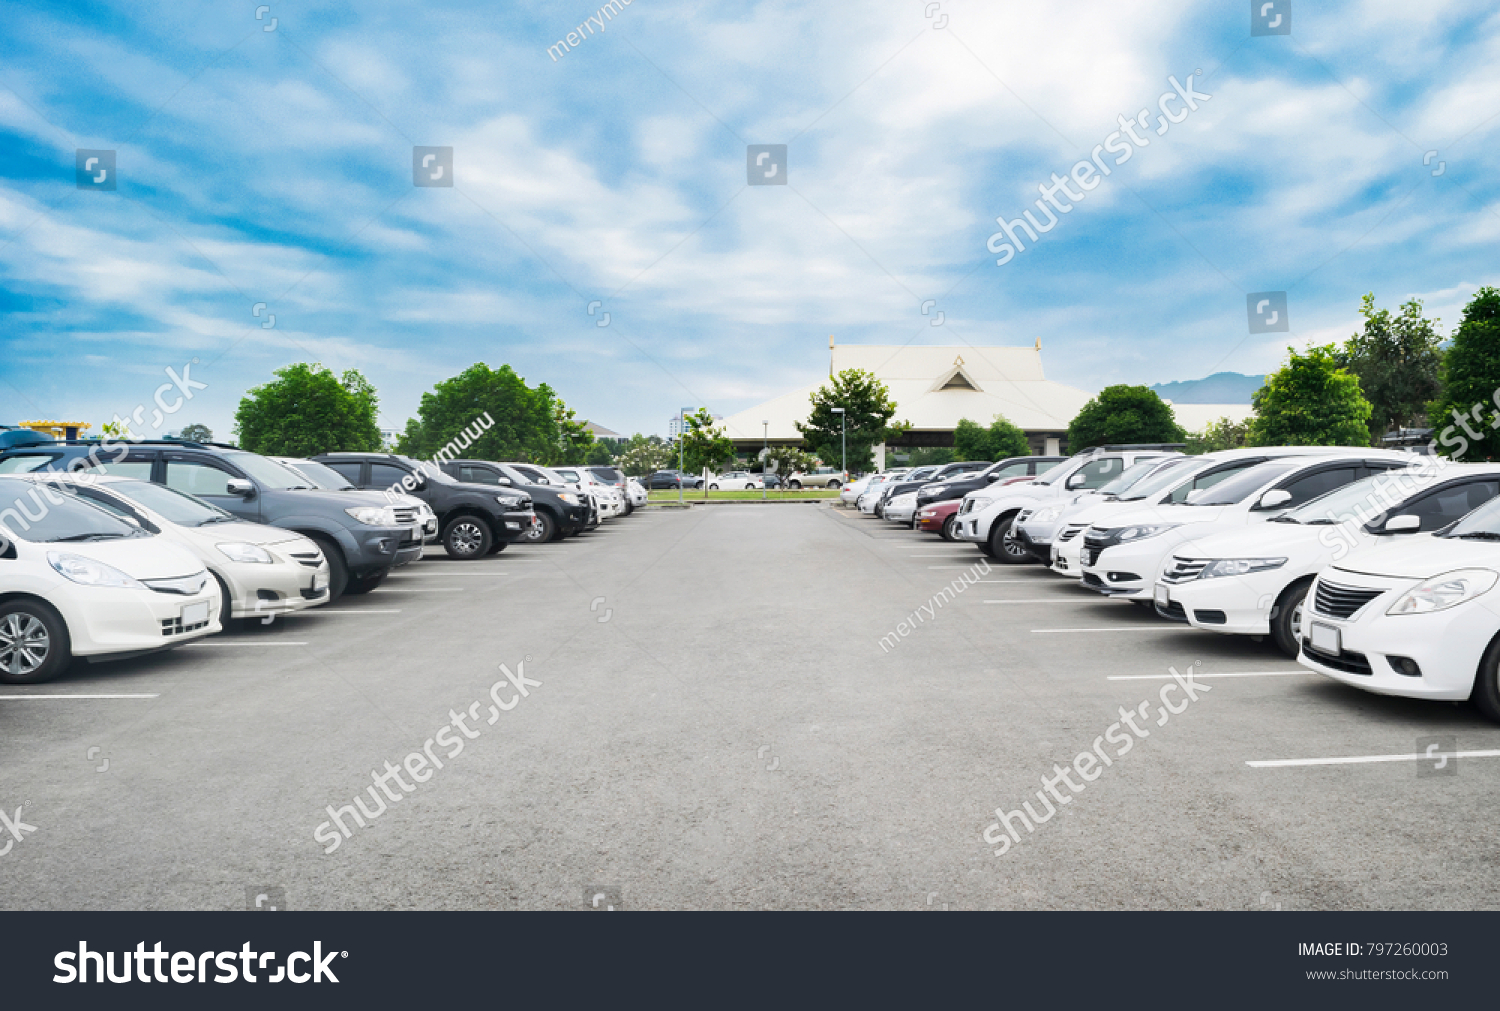 Car parking in large asphalt parking lot with trees, white cloud and blue sky background in front of hall building. Outdoor parking lot with fresh ozone and green environment concept #797260003